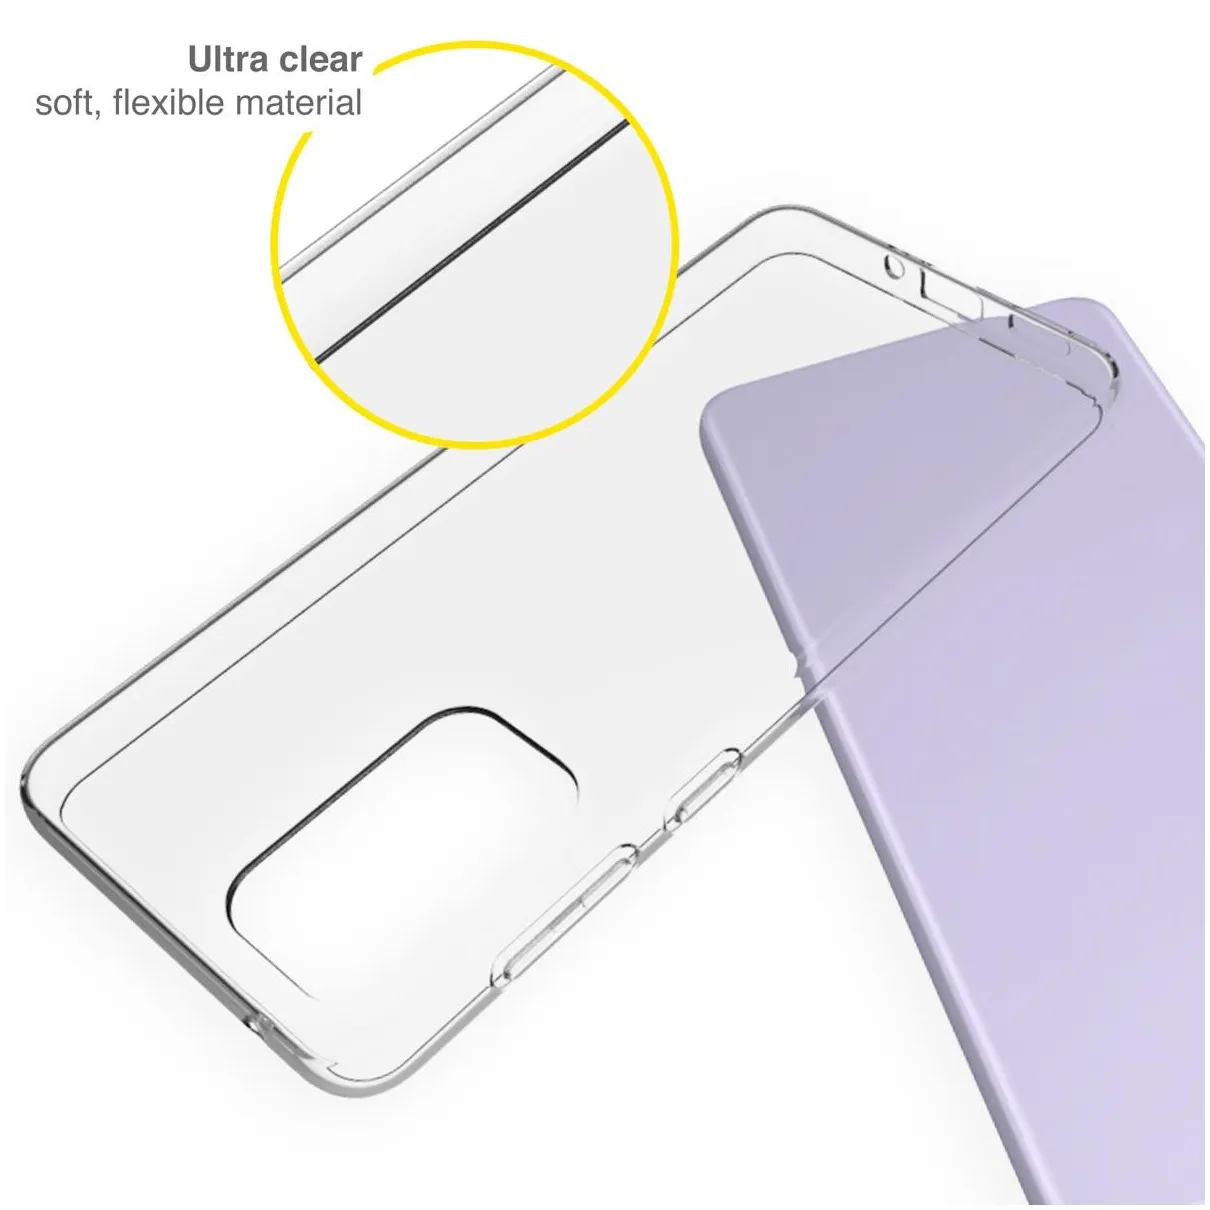 Accezz Clear Case voor Samsung Galaxy A33 Transparant